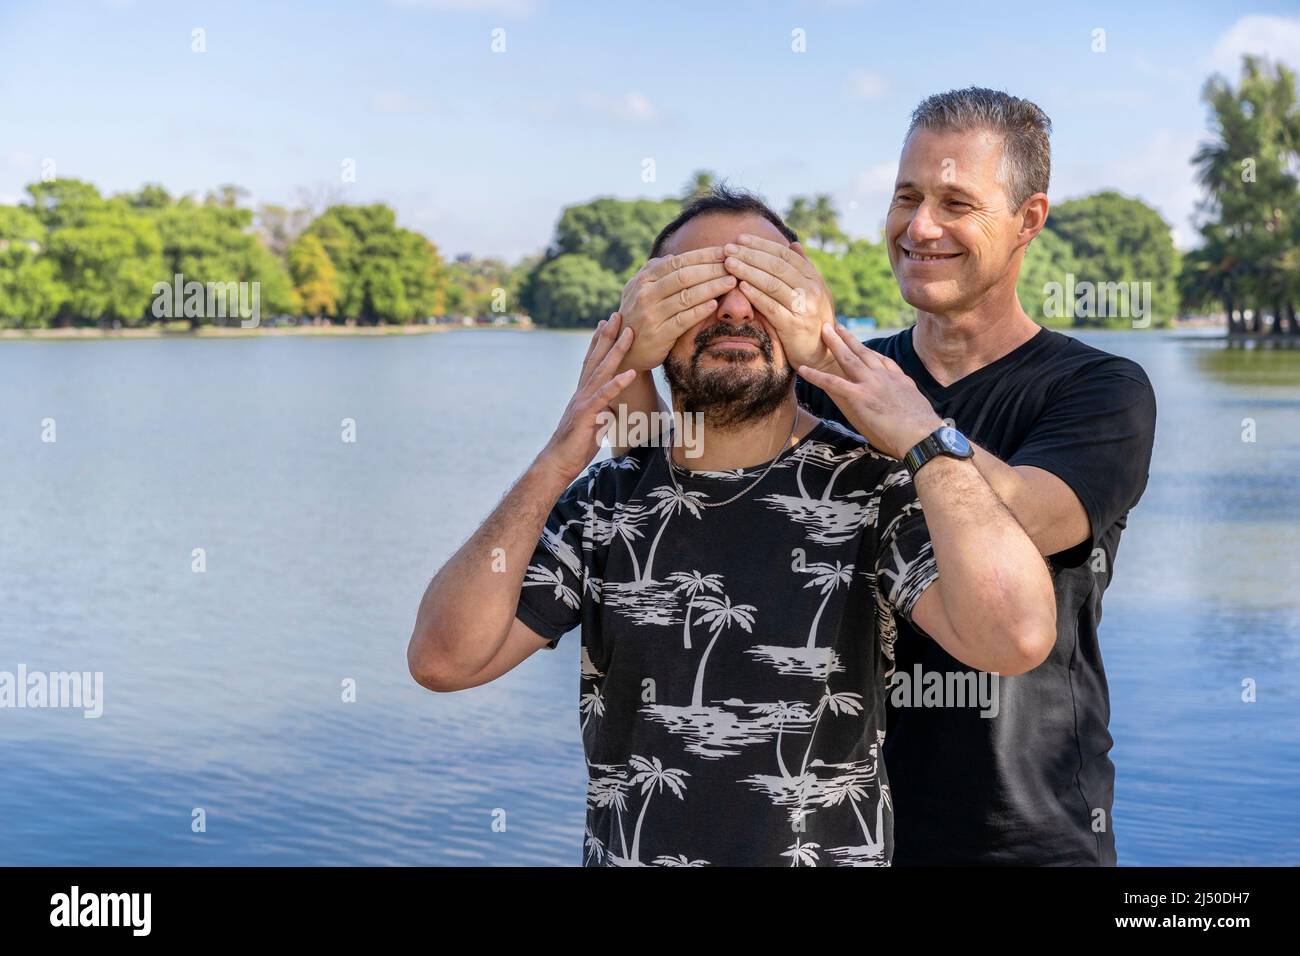 Couple of mature gay men, one surprising the other by covering his eyes in a lake. Concept of surprise, happiness, game Stock Photo